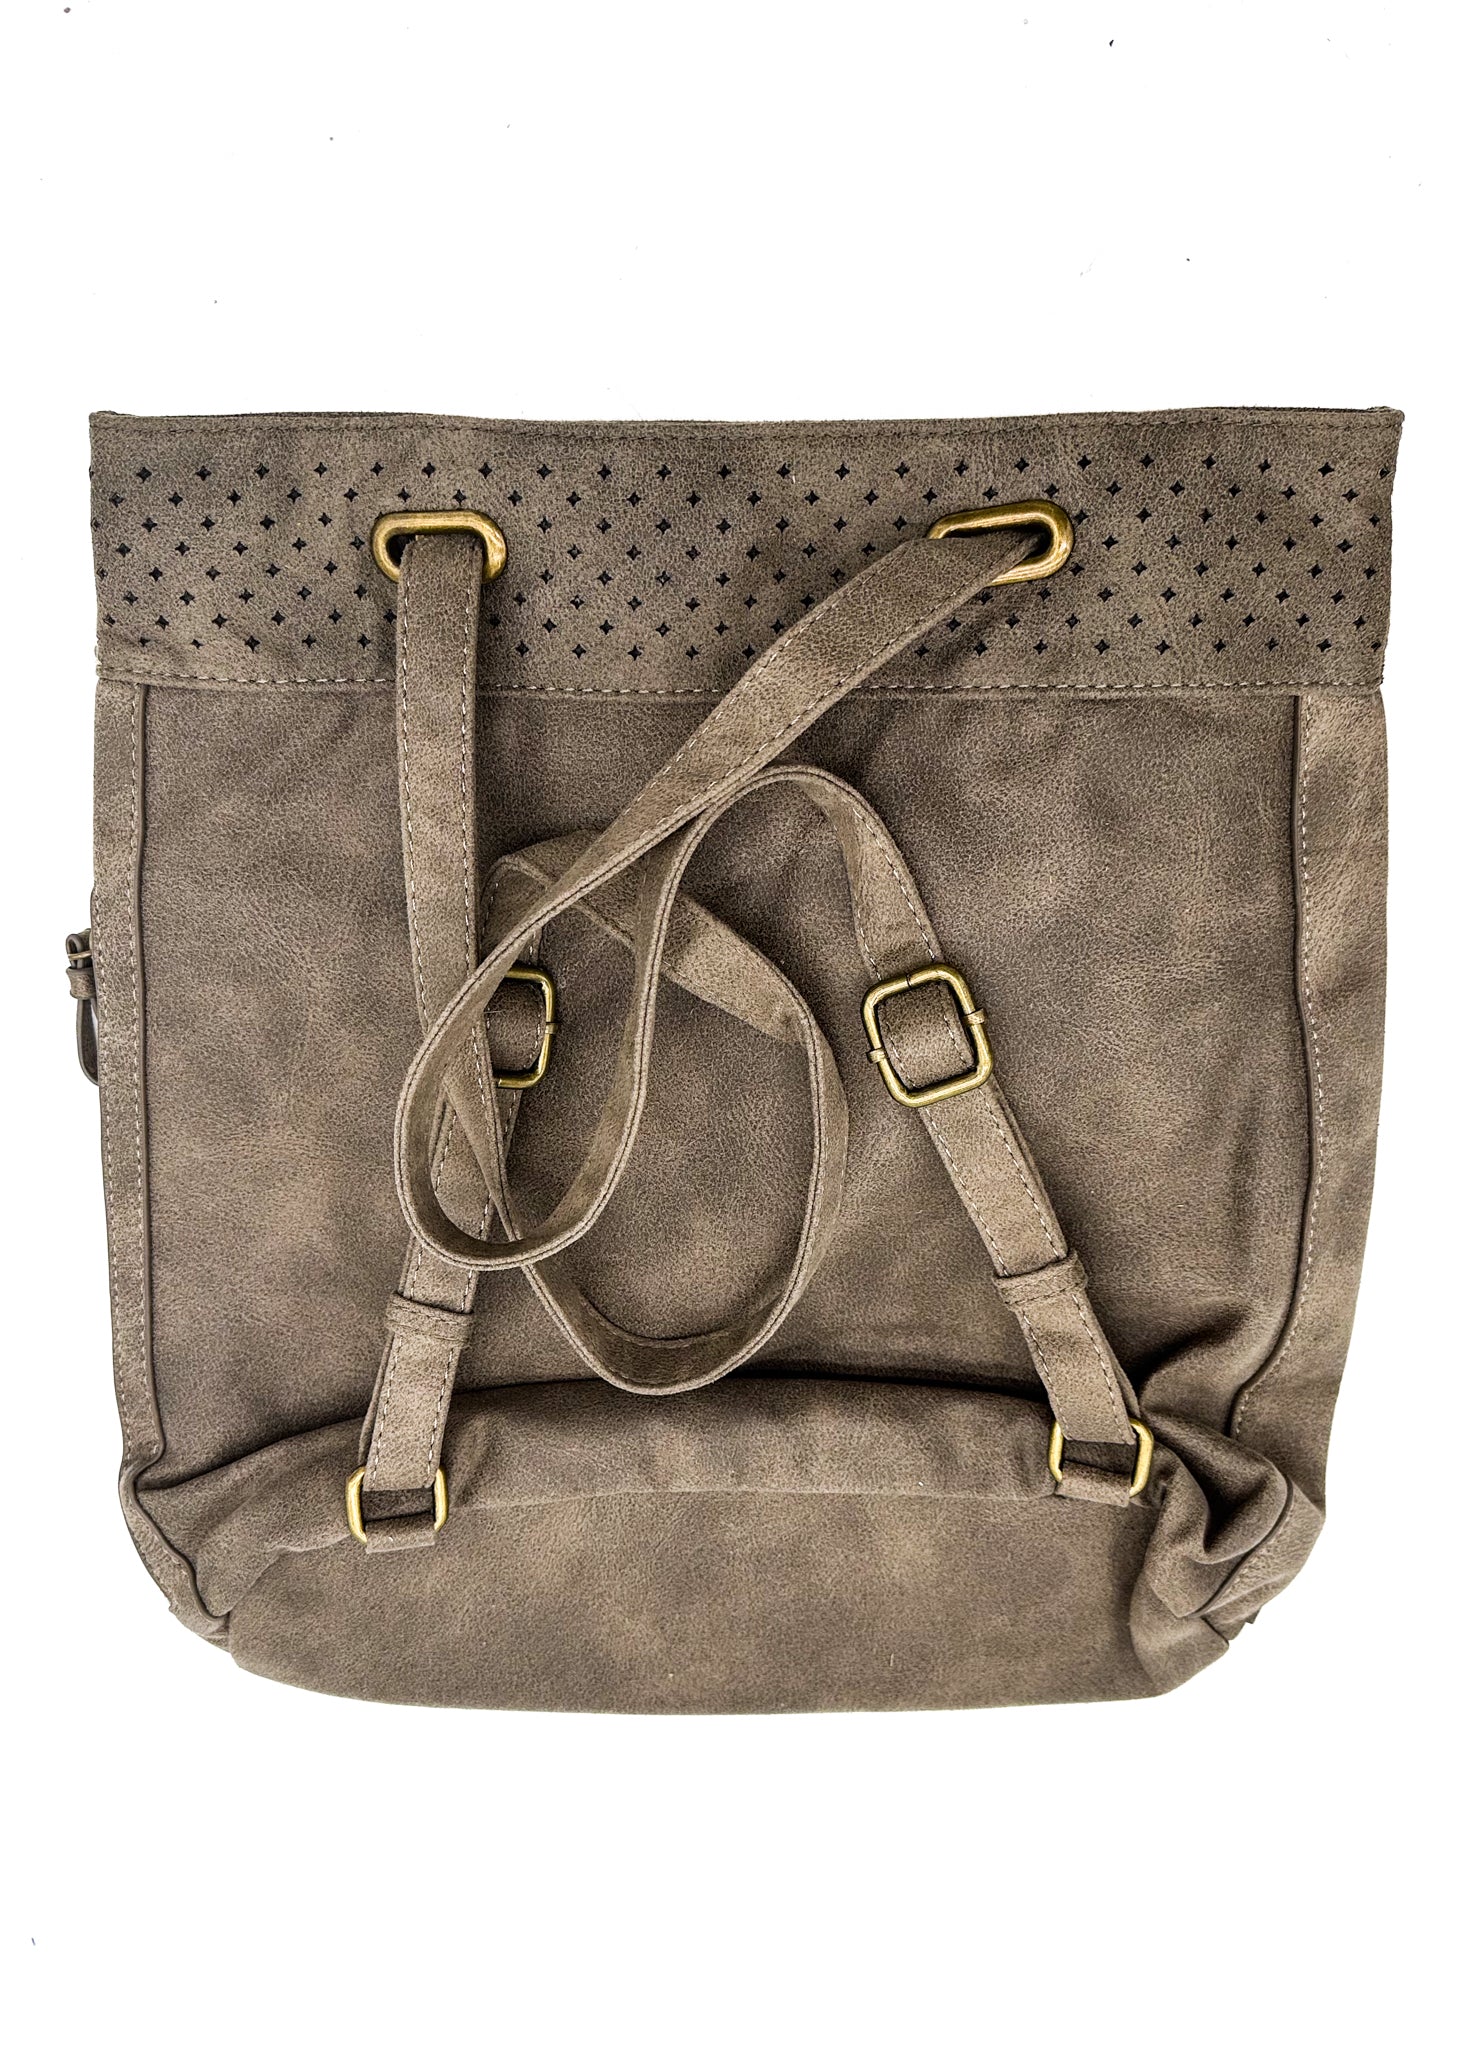 Giggy Backpack in Taupe